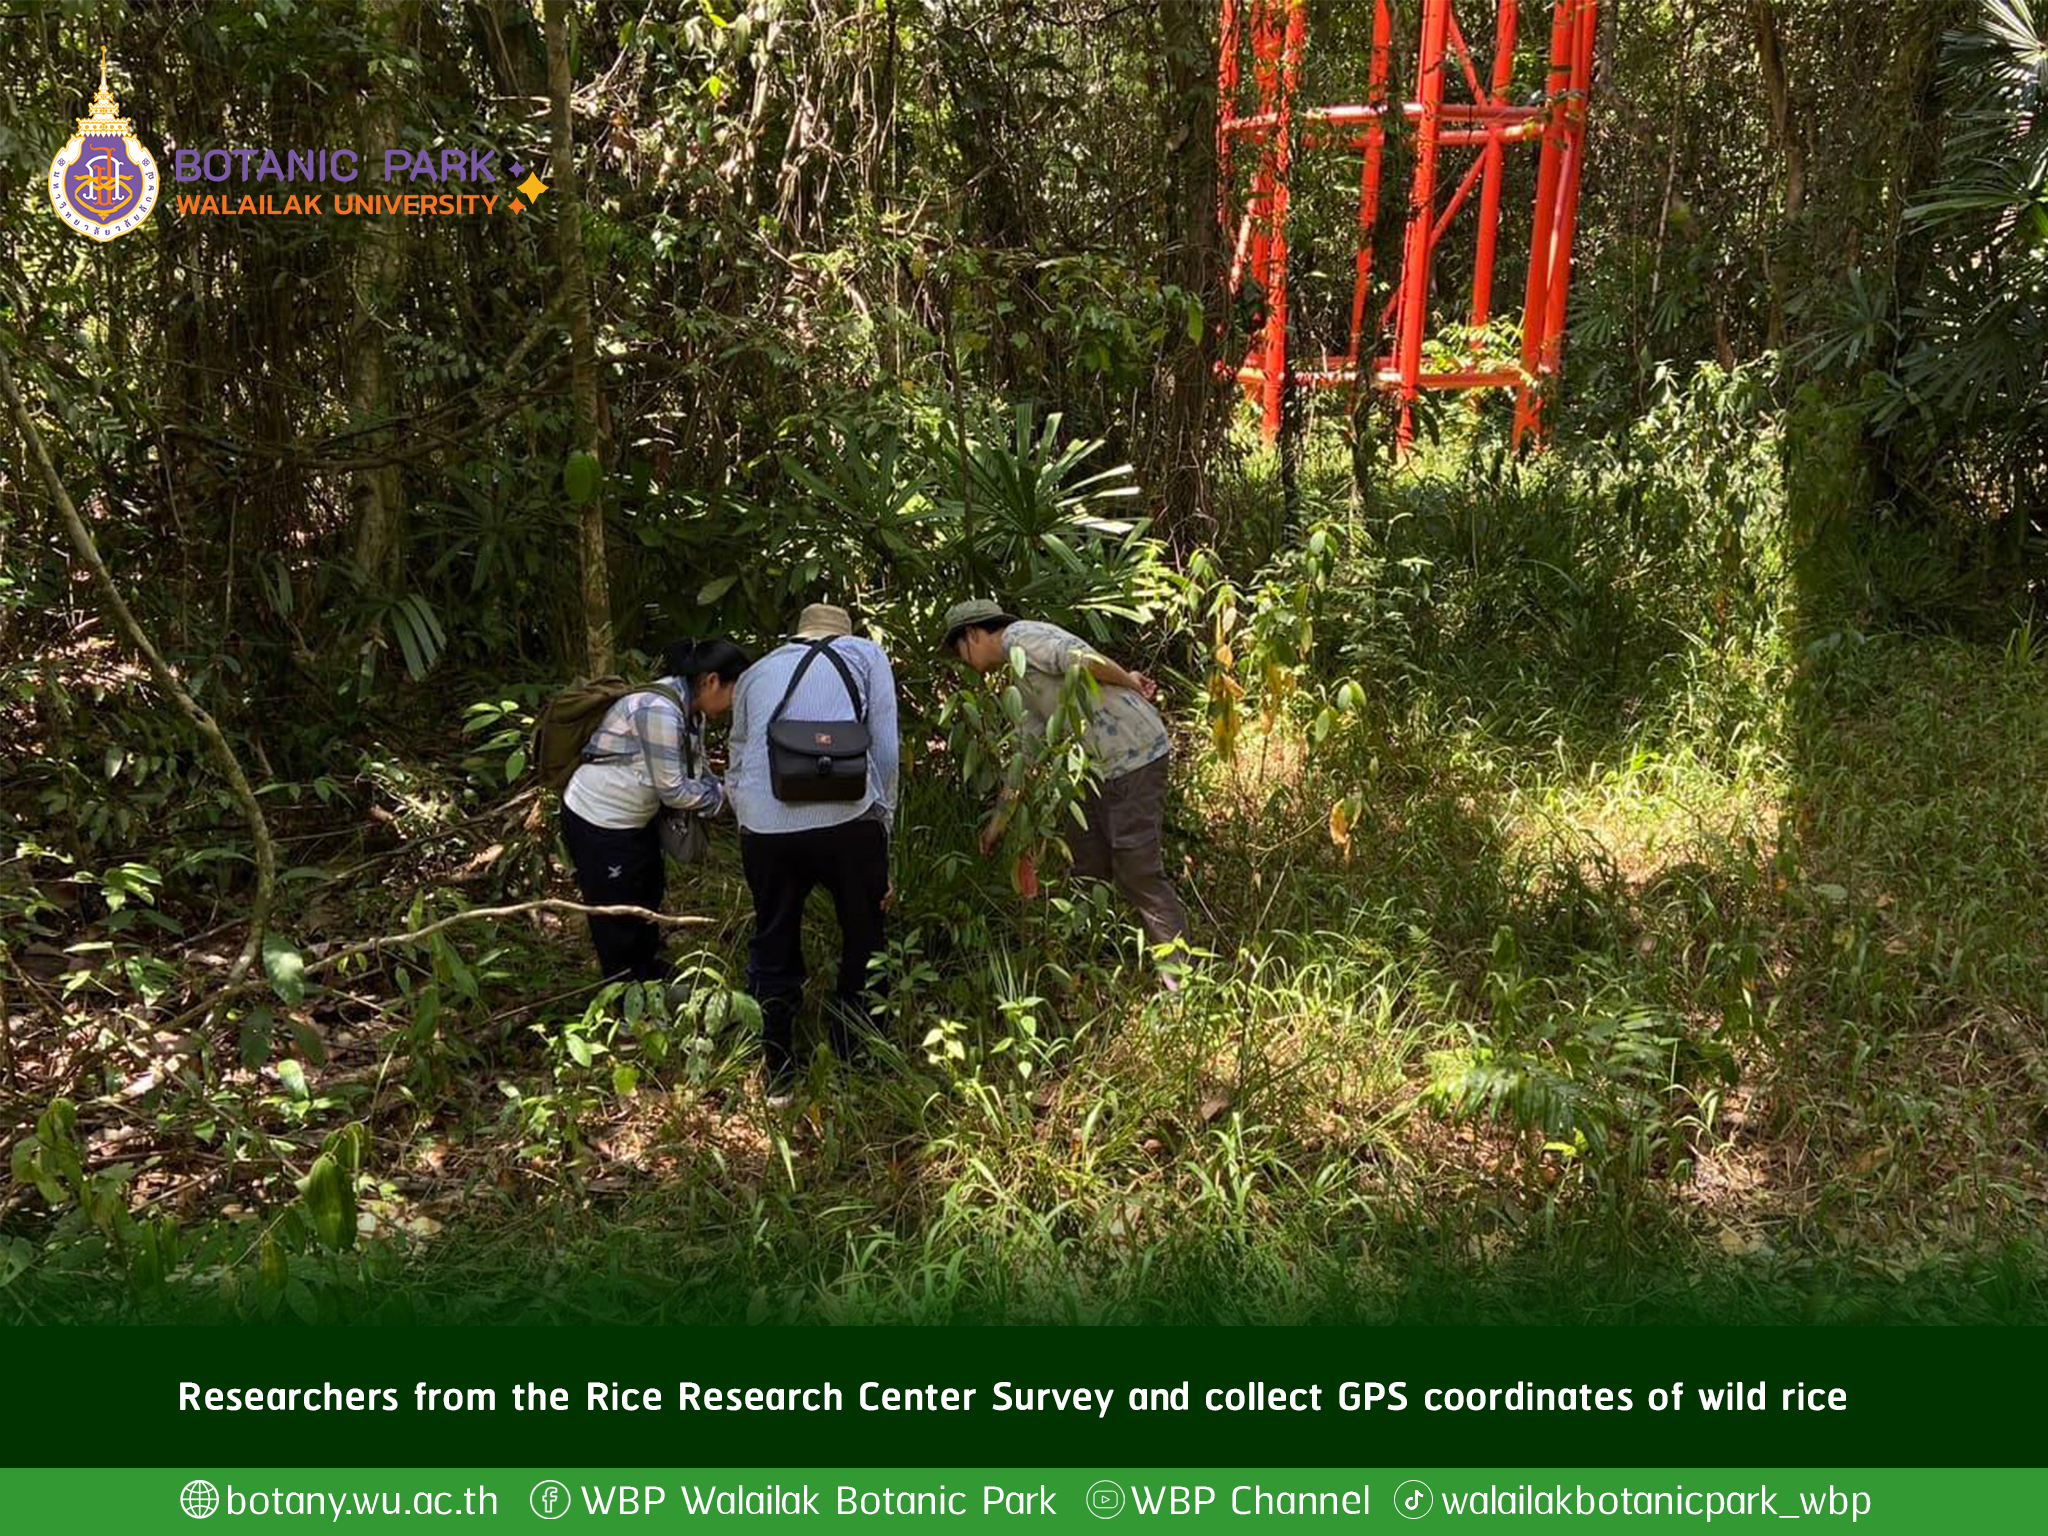 Researchers from the Rice Research Center Survey and collect GPS coordinates of wild rice